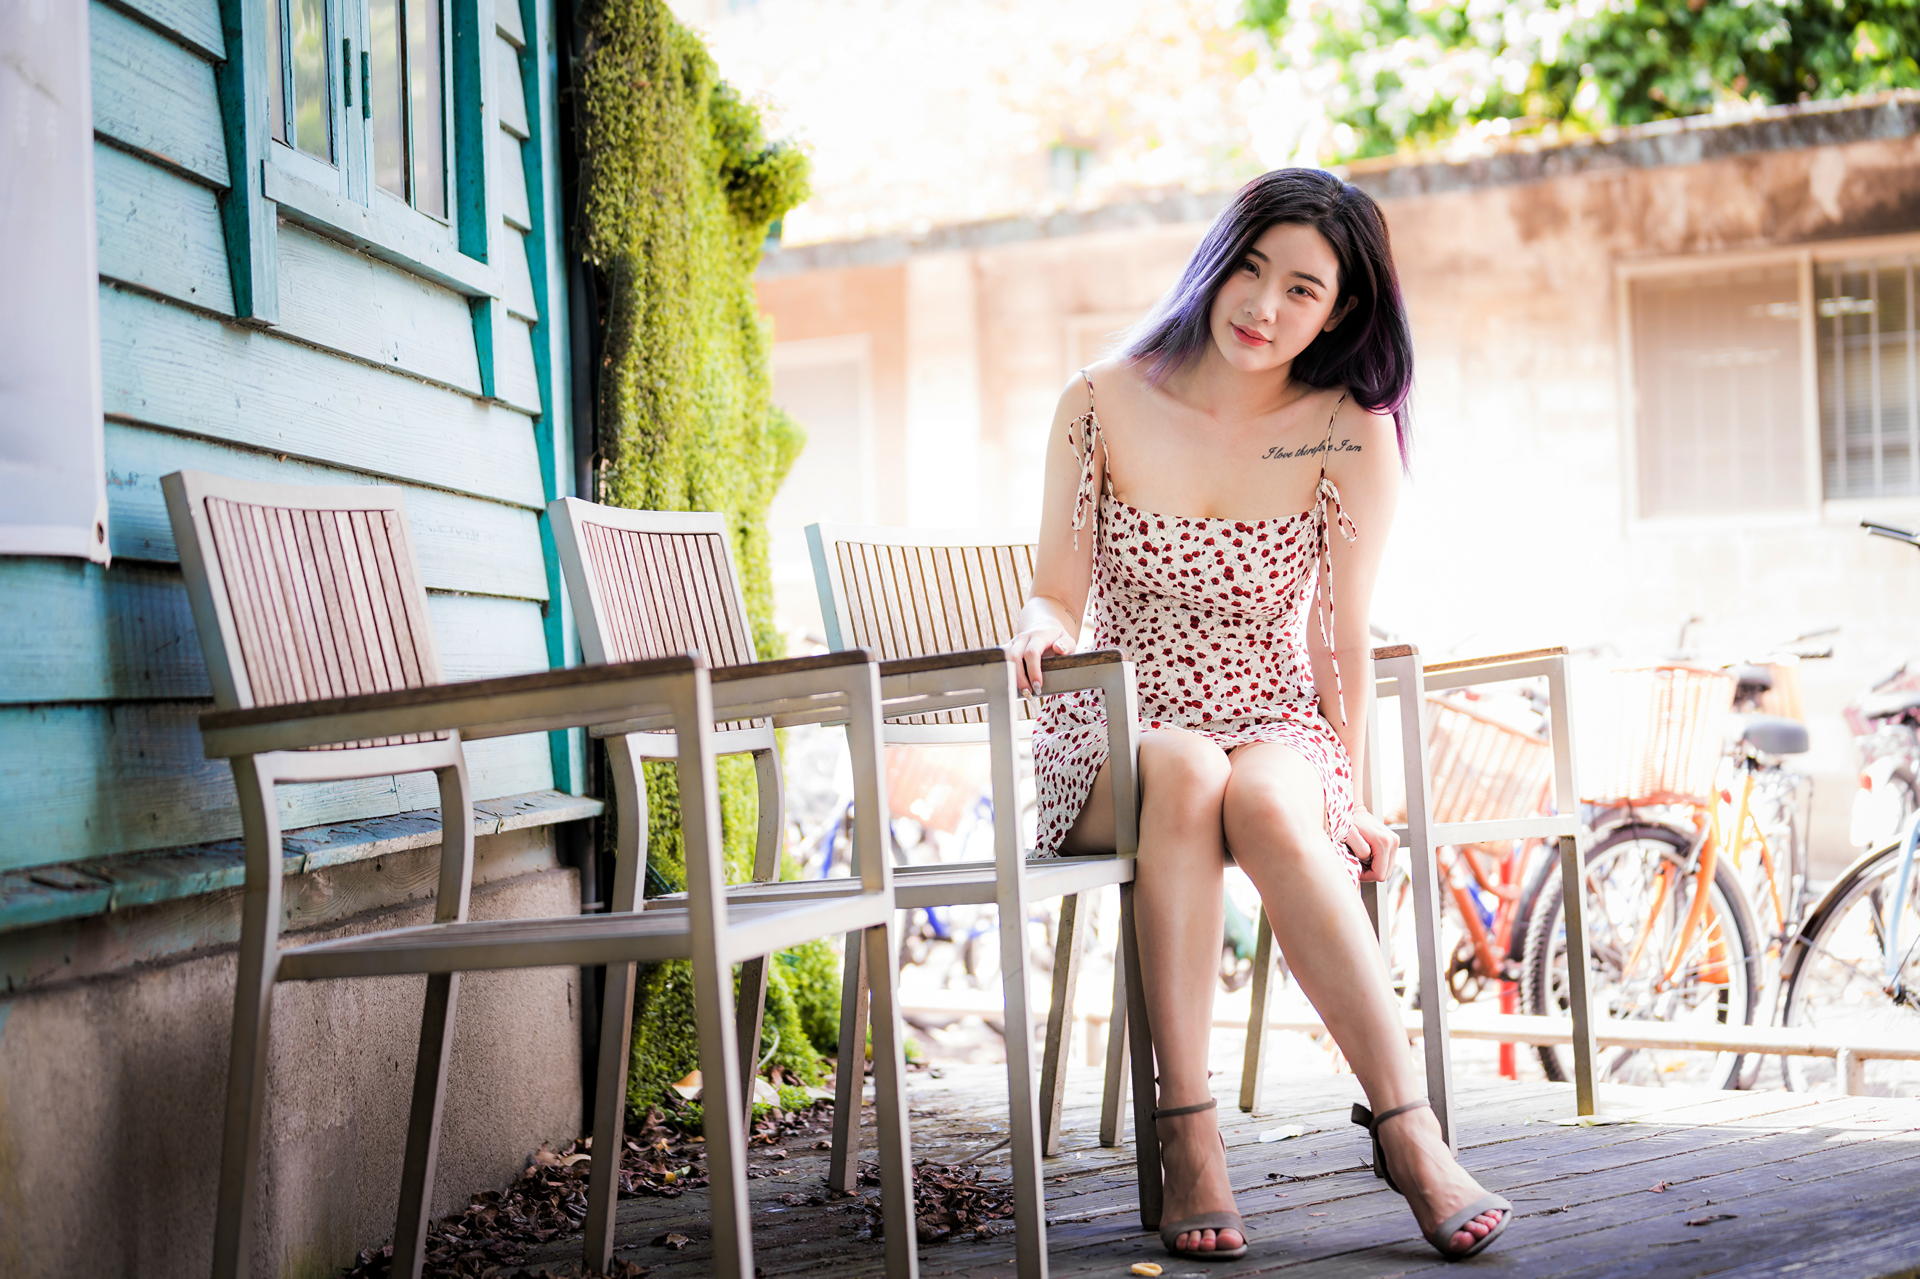 Asian Model Women Long Hair Brunette Barefoot Sandal Tattoo Sitting Chair Bicycle Depth Of Field Hed 1920x1279